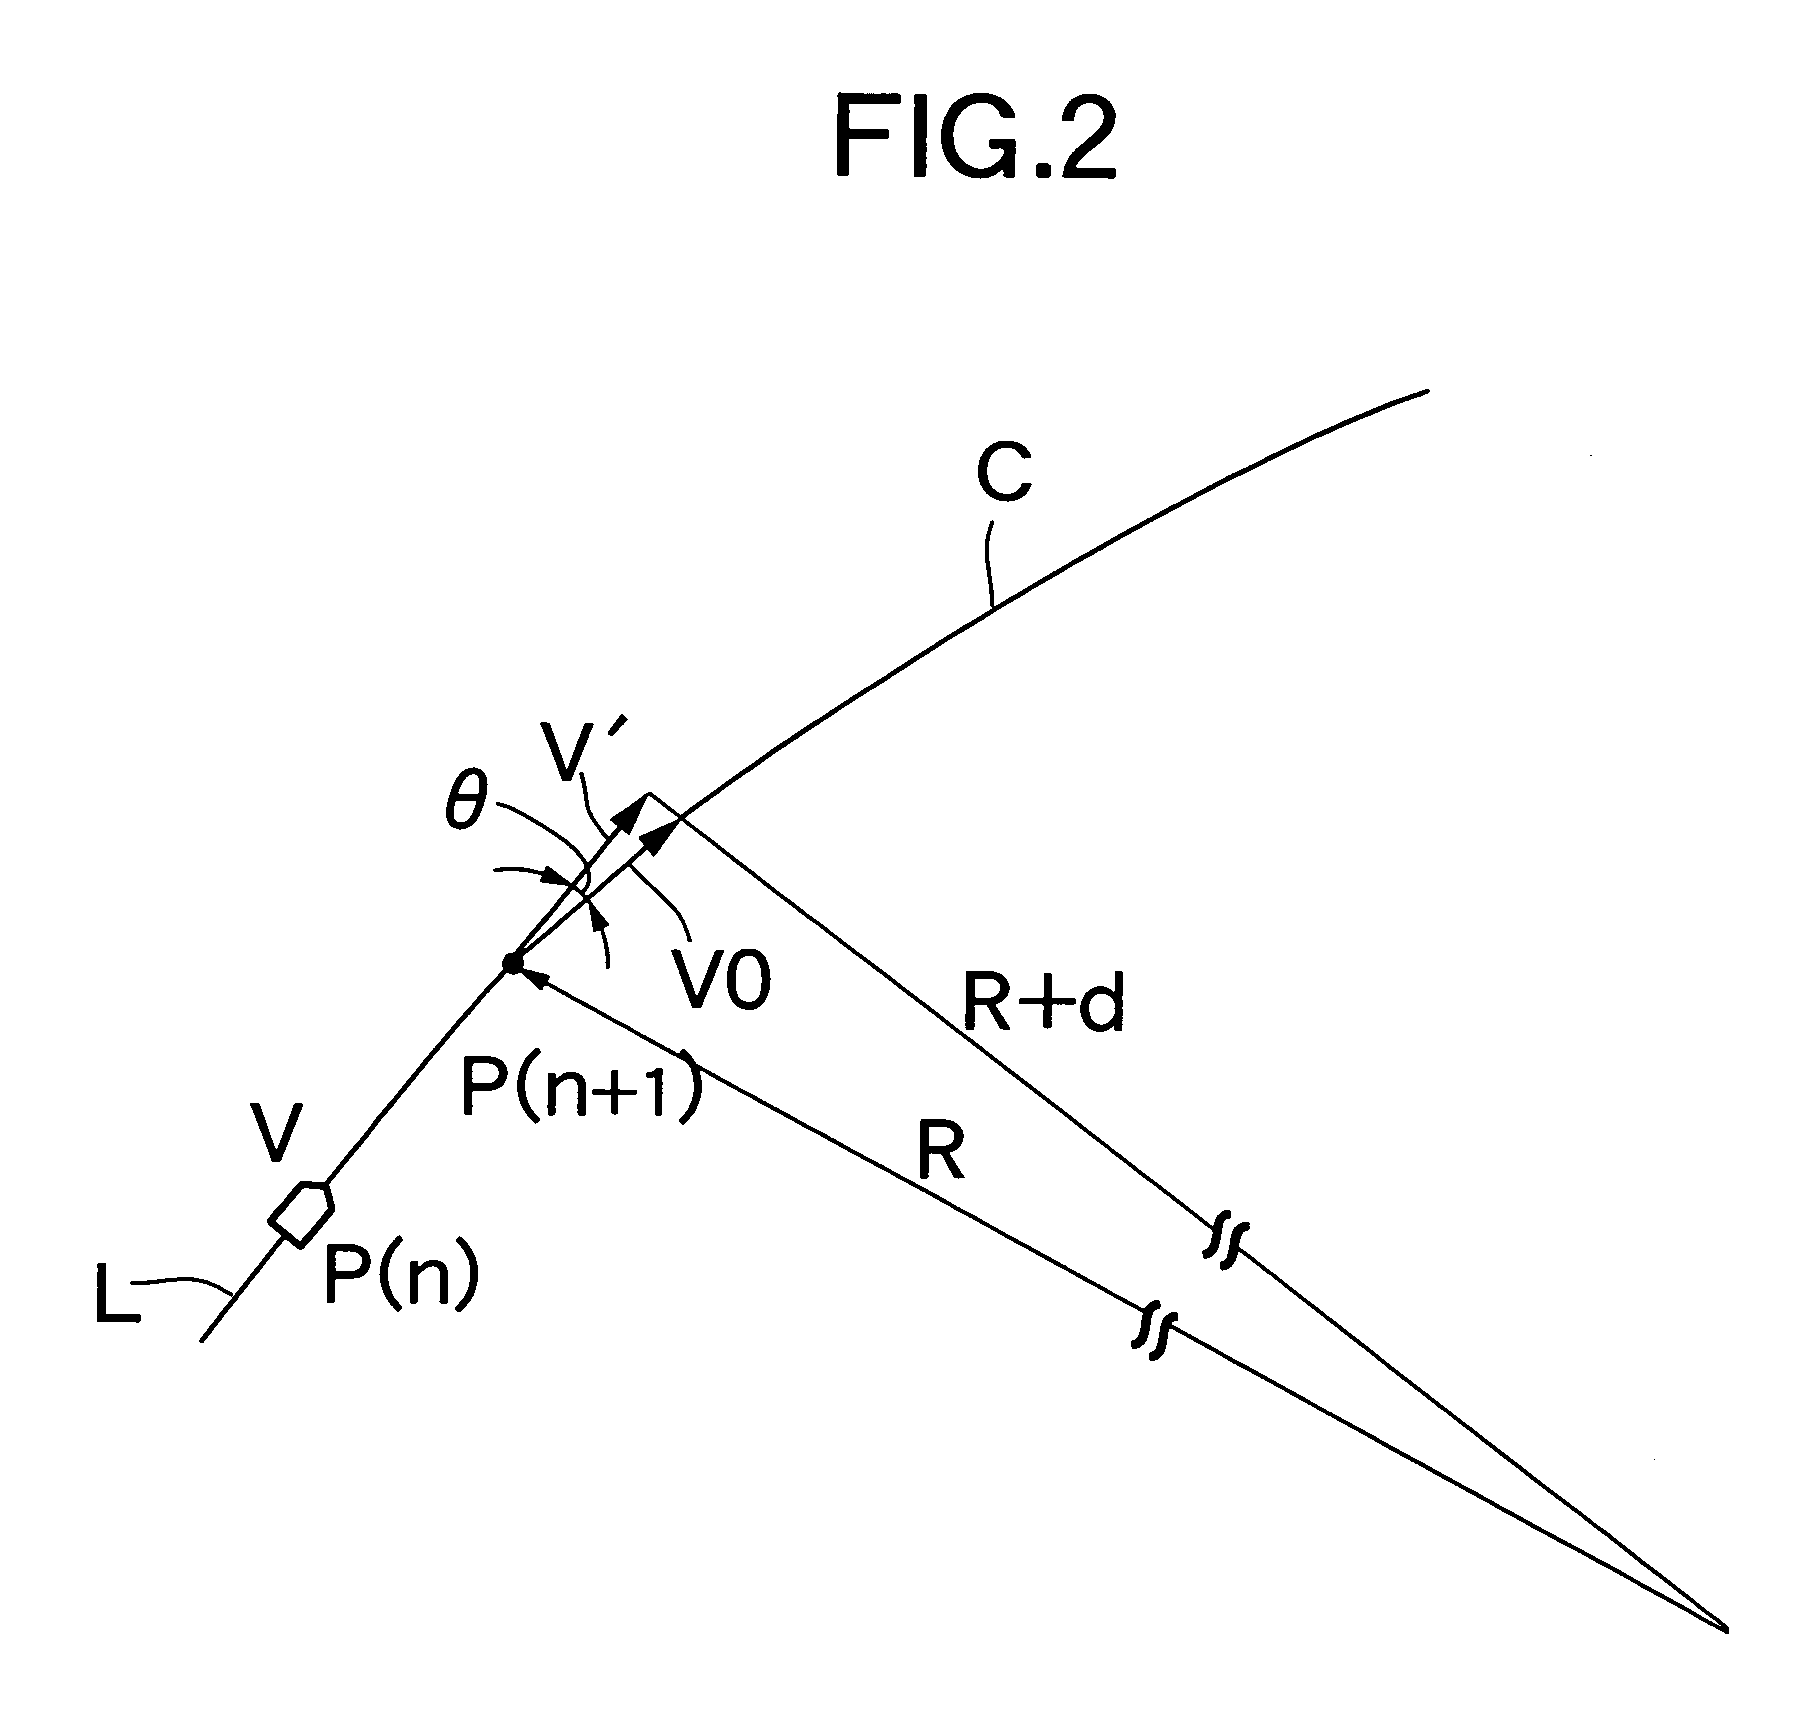 Motion control apparatus for vehicle